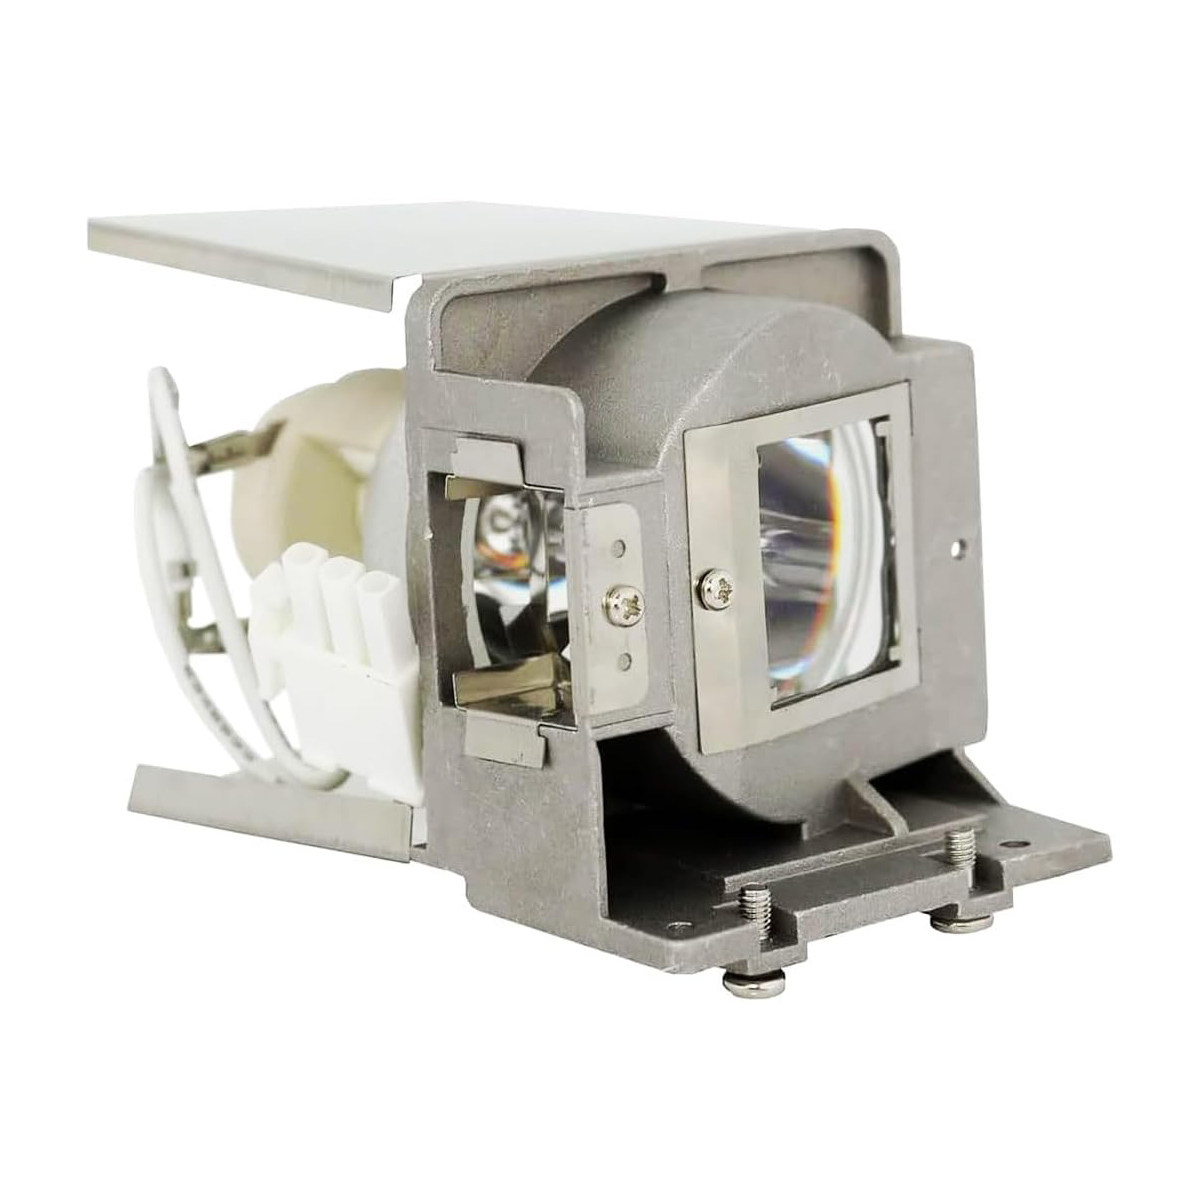 Replacement Projector lamp BL-FP180F For OPTOMA DS3-XL DS5-XL DS550 DS551 DX550